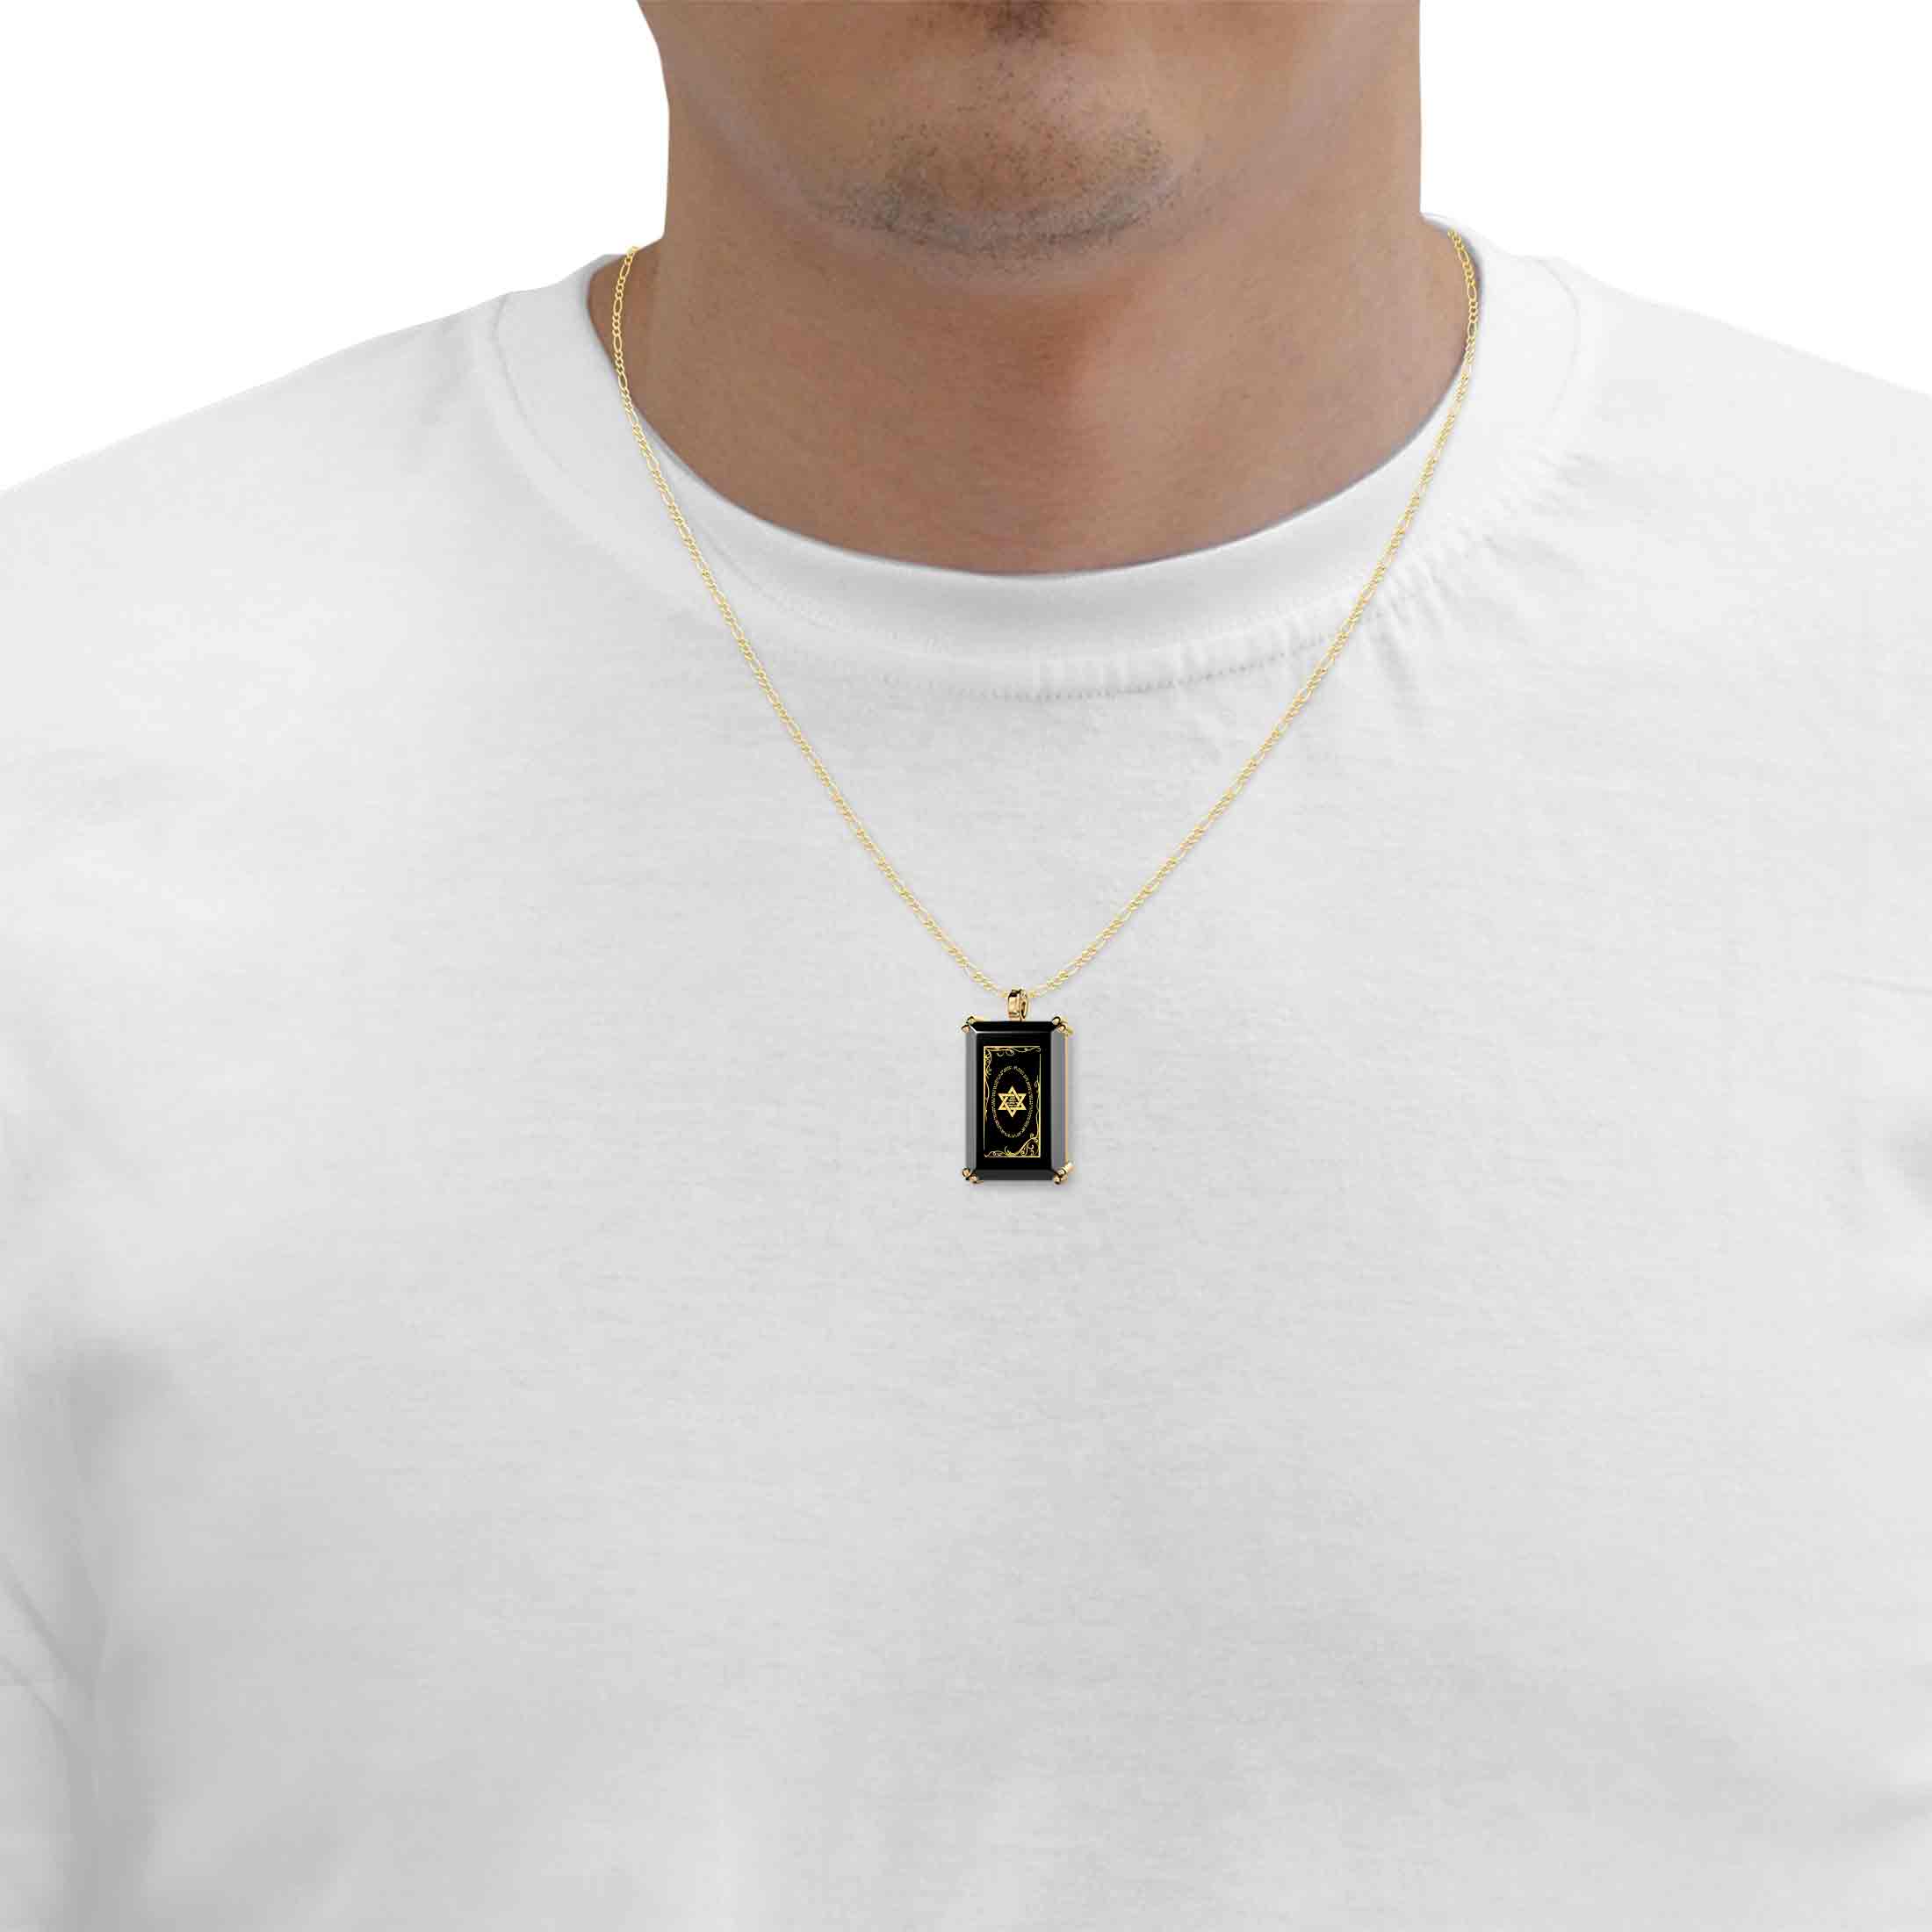 A Men's Star of David Necklace Shema Israel Pendant 24k Gold Inscribed on Onyx with ornate golden patterns.